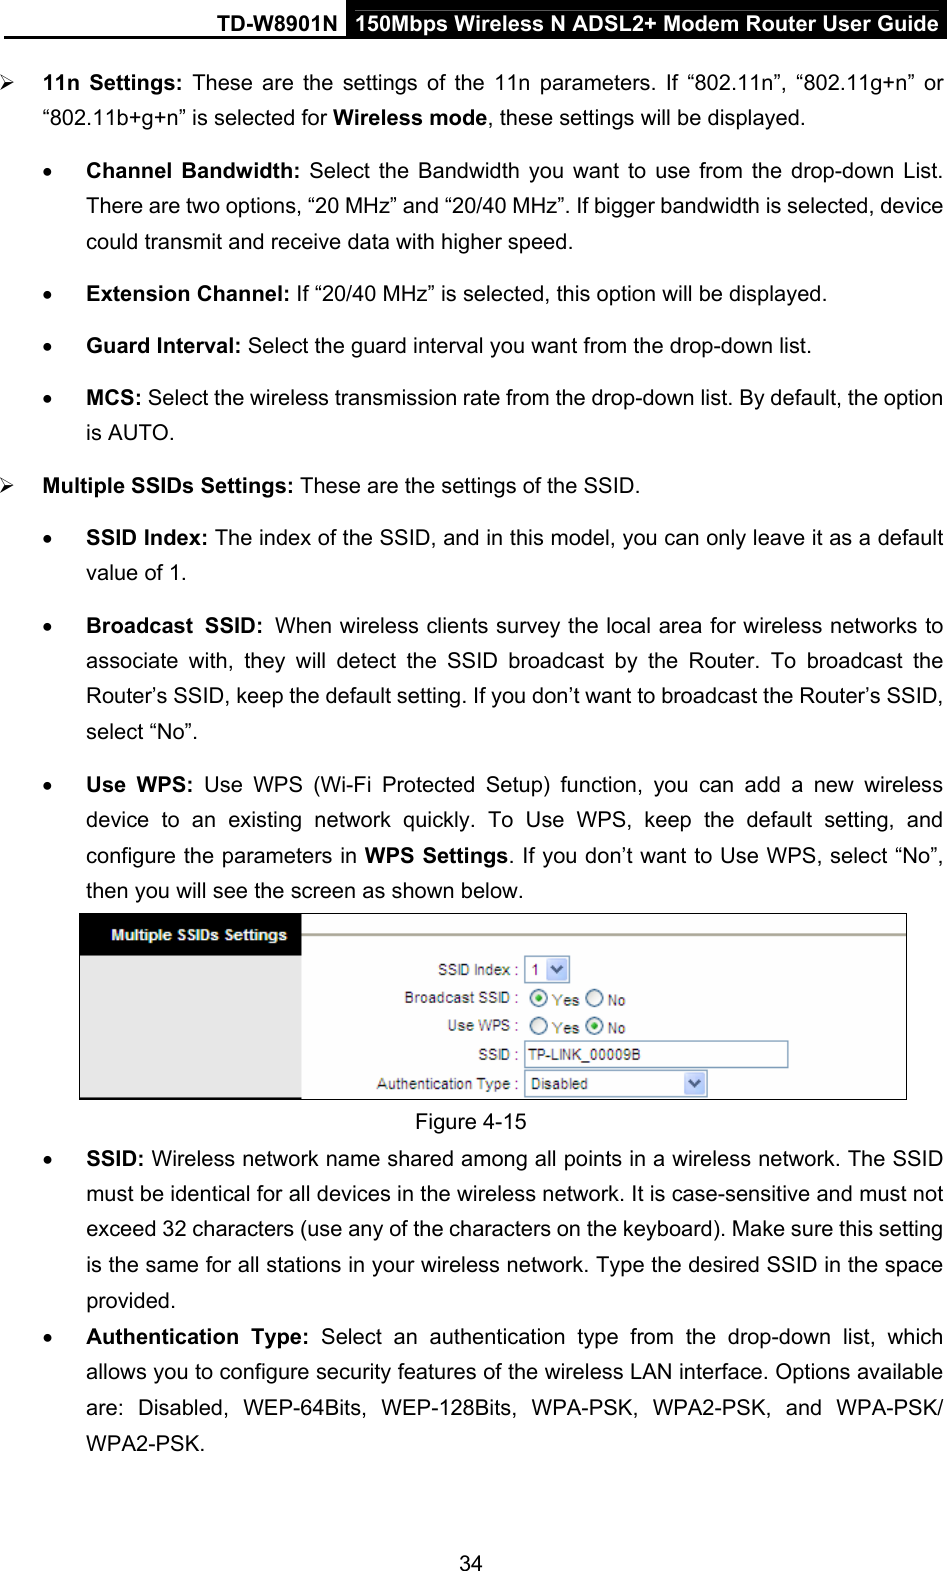 TD-W8901N  150Mbps Wireless N ADSL2+ Modem Router User Guide 34  11n Settings: These are the settings of the 11n parameters. If “802.11n”, “802.11g+n” or “802.11b+g+n” is selected for Wireless mode, these settings will be displayed.  Channel Bandwidth: Select the Bandwidth you want to use from the drop-down List. There are two options, “20 MHz” and “20/40 MHz”. If bigger bandwidth is selected, device could transmit and receive data with higher speed.  Extension Channel: If “20/40 MHz” is selected, this option will be displayed.  Guard Interval: Select the guard interval you want from the drop-down list.  MCS: Select the wireless transmission rate from the drop-down list. By default, the option is AUTO.  Multiple SSIDs Settings: These are the settings of the SSID.  SSID Index: The index of the SSID, and in this model, you can only leave it as a default value of 1.  Broadcast SSID: When wireless clients survey the local area for wireless networks to associate with, they will detect the SSID broadcast by the Router. To broadcast the Router’s SSID, keep the default setting. If you don’t want to broadcast the Router’s SSID, select “No”.  Use WPS: Use WPS (Wi-Fi Protected Setup) function, you can add a new wireless device to an existing network quickly. To Use WPS, keep the default setting, and configure the parameters in WPS Settings. If you don’t want to Use WPS, select “No”, then you will see the screen as shown below.  Figure 4-15  SSID: Wireless network name shared among all points in a wireless network. The SSID must be identical for all devices in the wireless network. It is case-sensitive and must not exceed 32 characters (use any of the characters on the keyboard). Make sure this setting is the same for all stations in your wireless network. Type the desired SSID in the space provided.  Authentication Type: Select an authentication type from the drop-down list, which allows you to configure security features of the wireless LAN interface. Options available are: Disabled, WEP-64Bits, WEP-128Bits, WPA-PSK, WPA2-PSK, and WPA-PSK/ WPA2-PSK.  